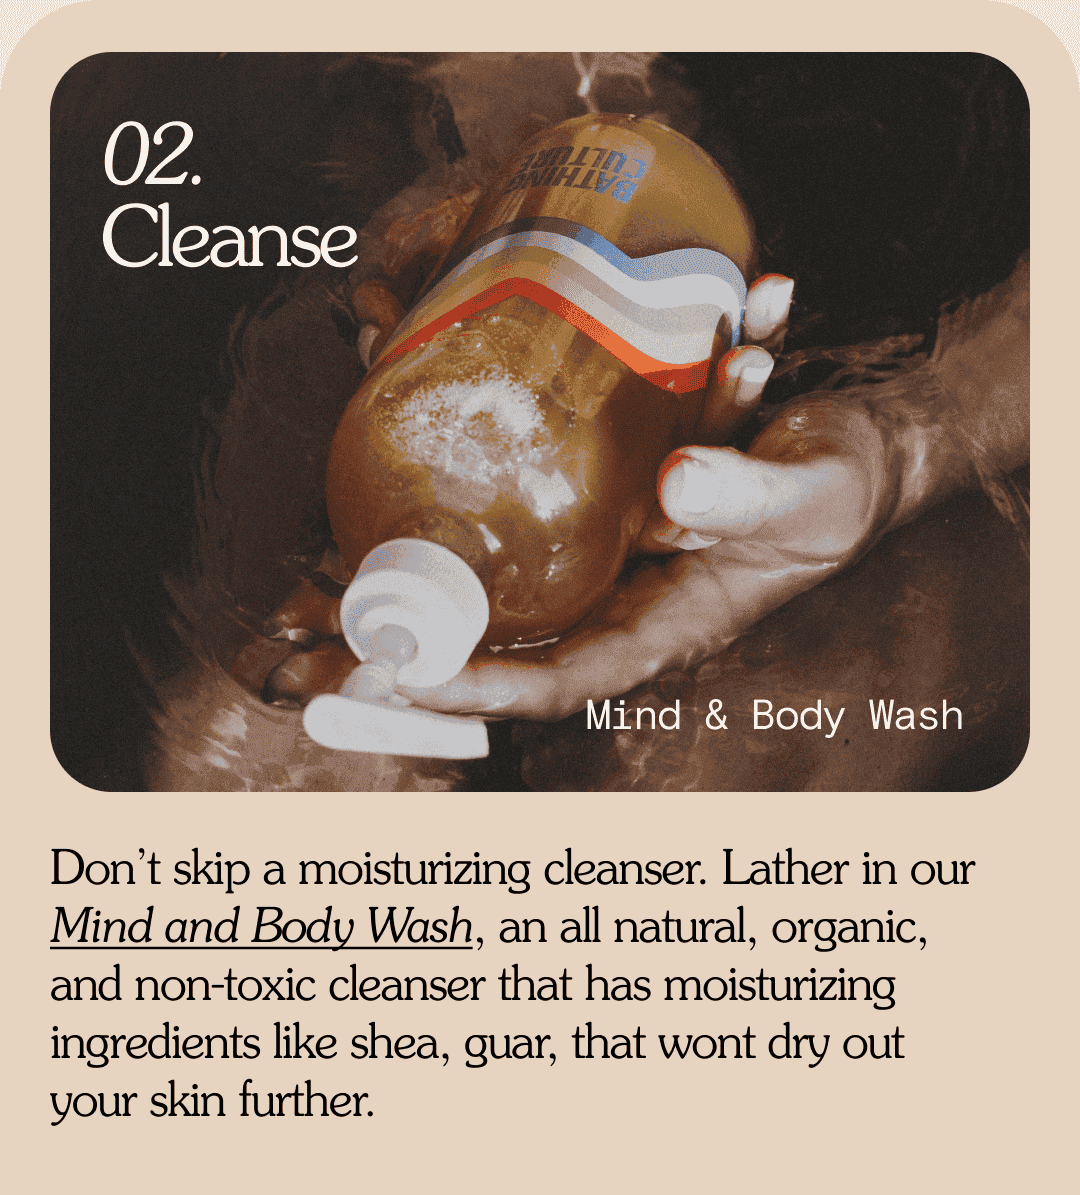 02. Cleanse Mind & Body Wash Don’t skip a moisturizing cleanser. Lather in our Mind and Body Wash, an all natural, organic, and non-toxic cleanser that has moisturizing ingredients like shea, guar, that wont dry out  your skin further.